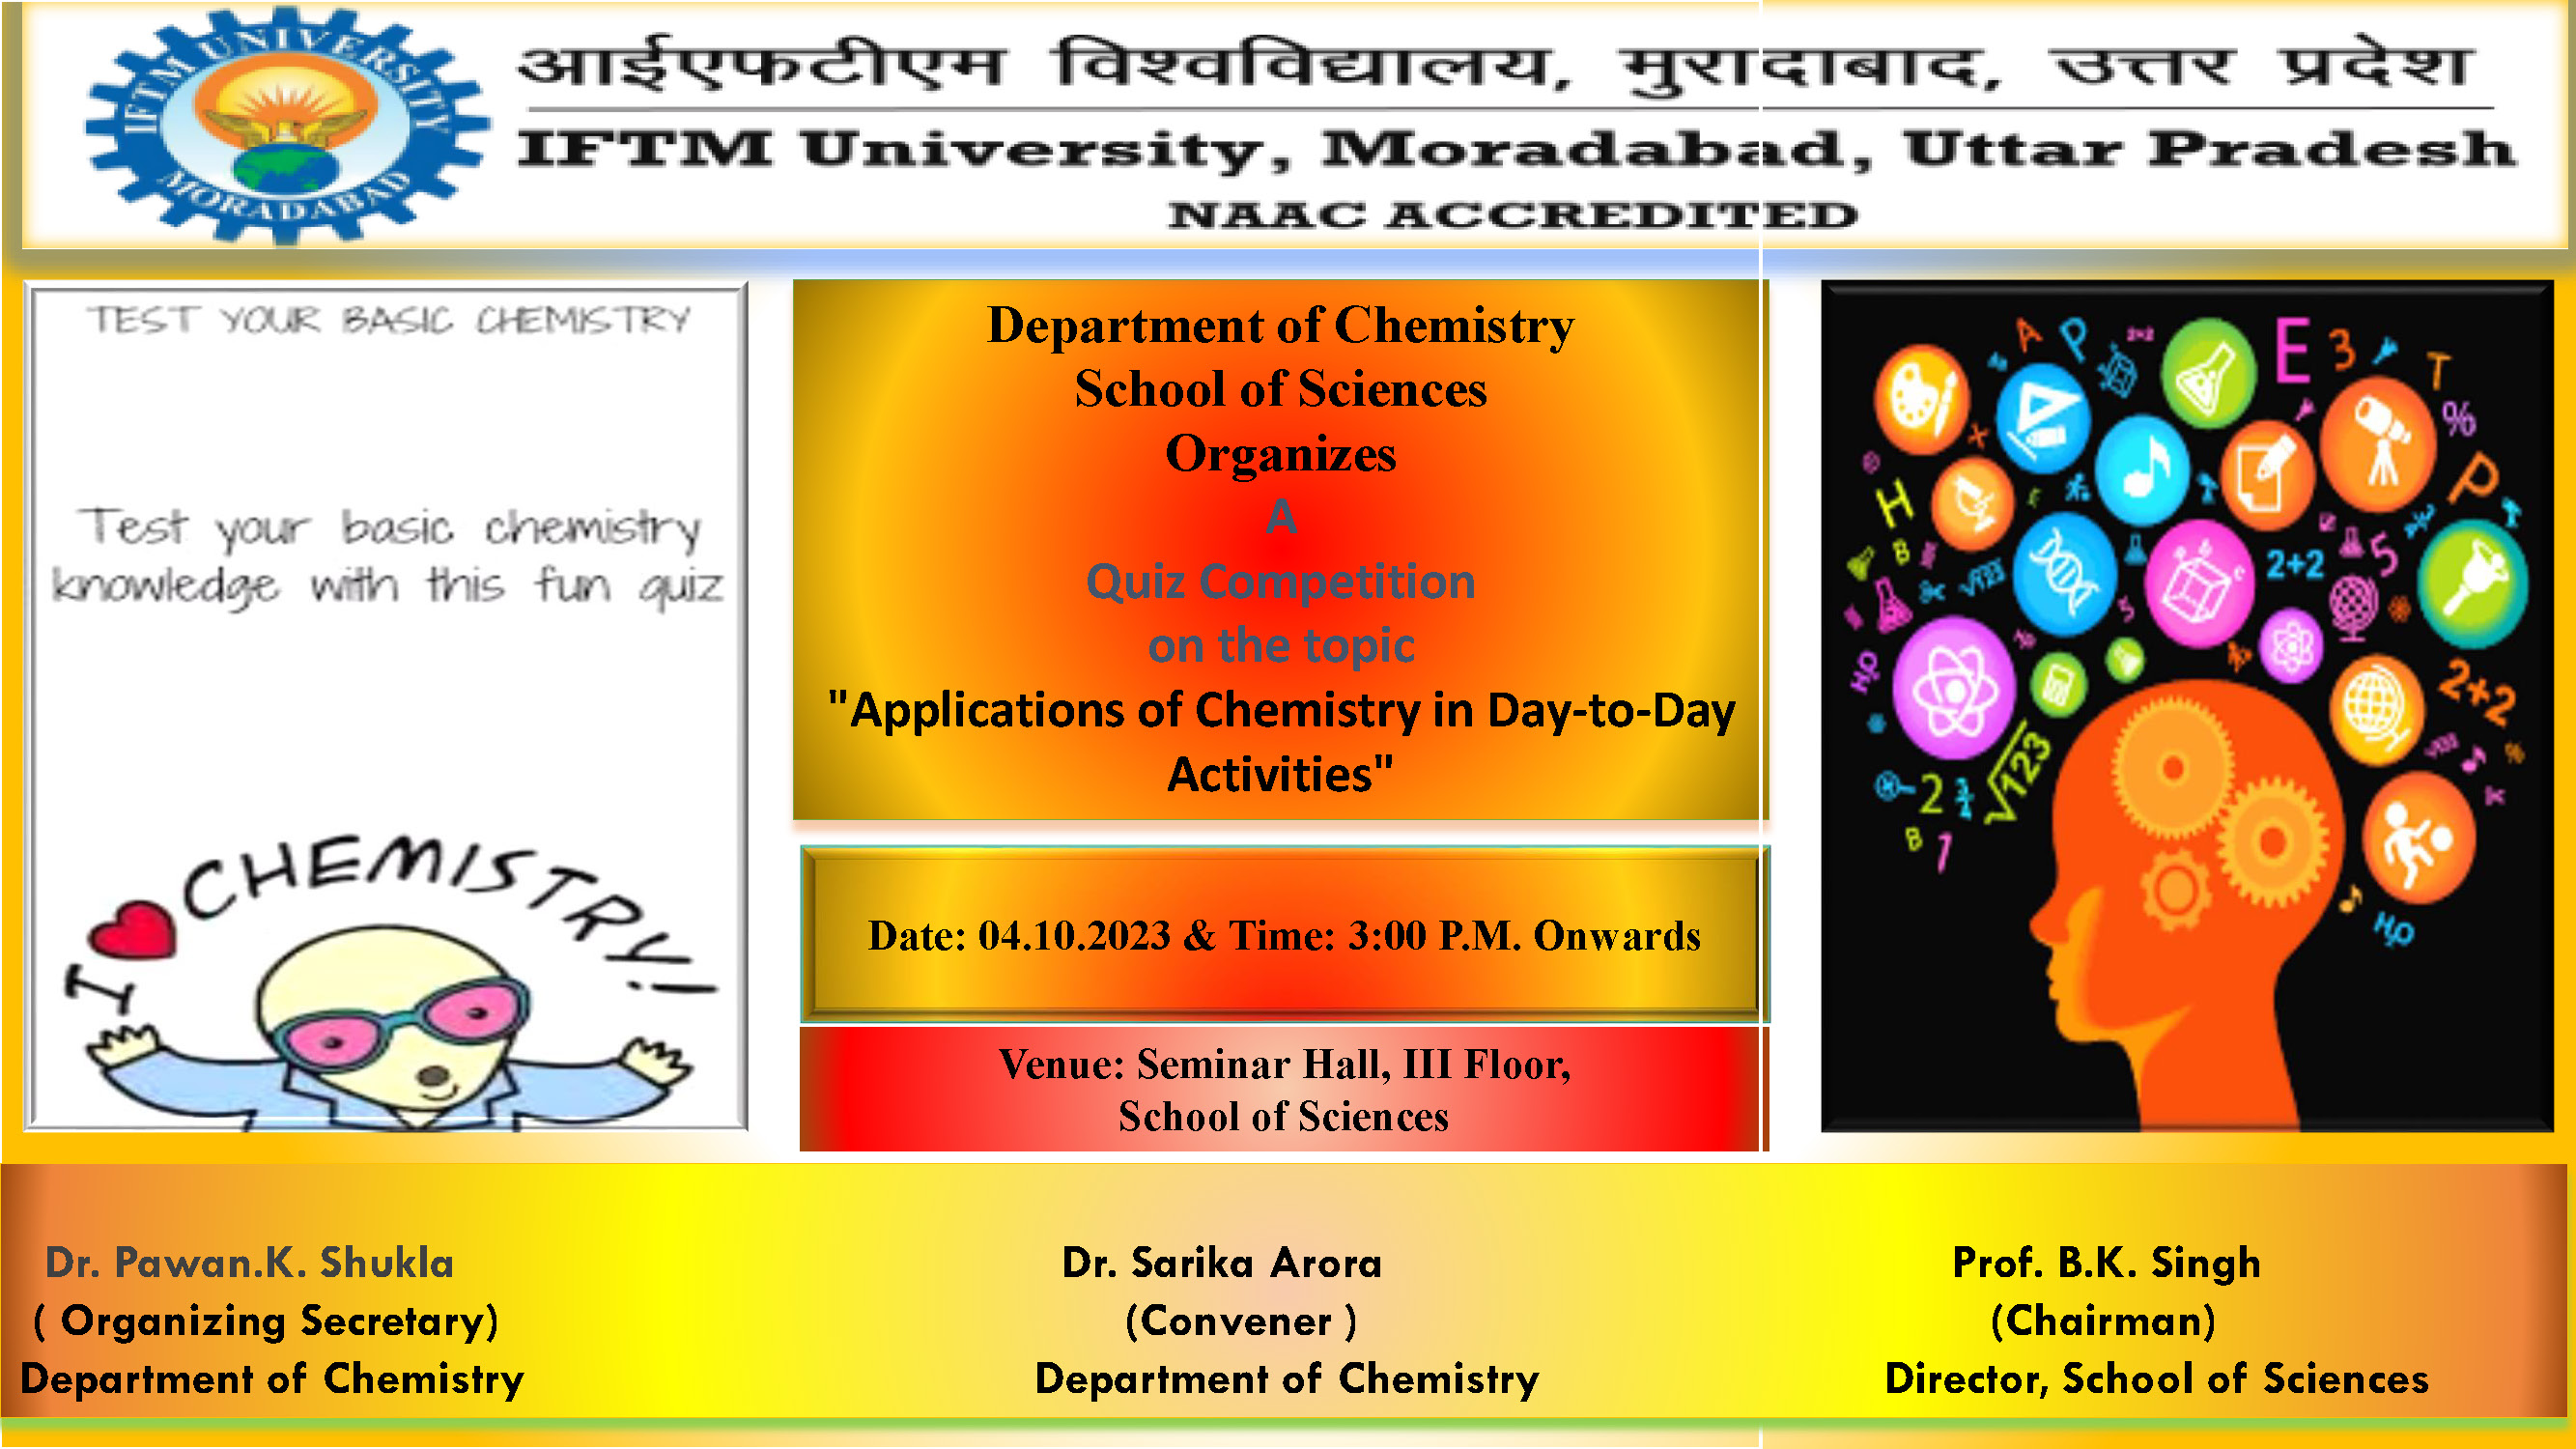 A Quiz Competition on the topic: Applications of Chemistry in Day-to-Day Activities